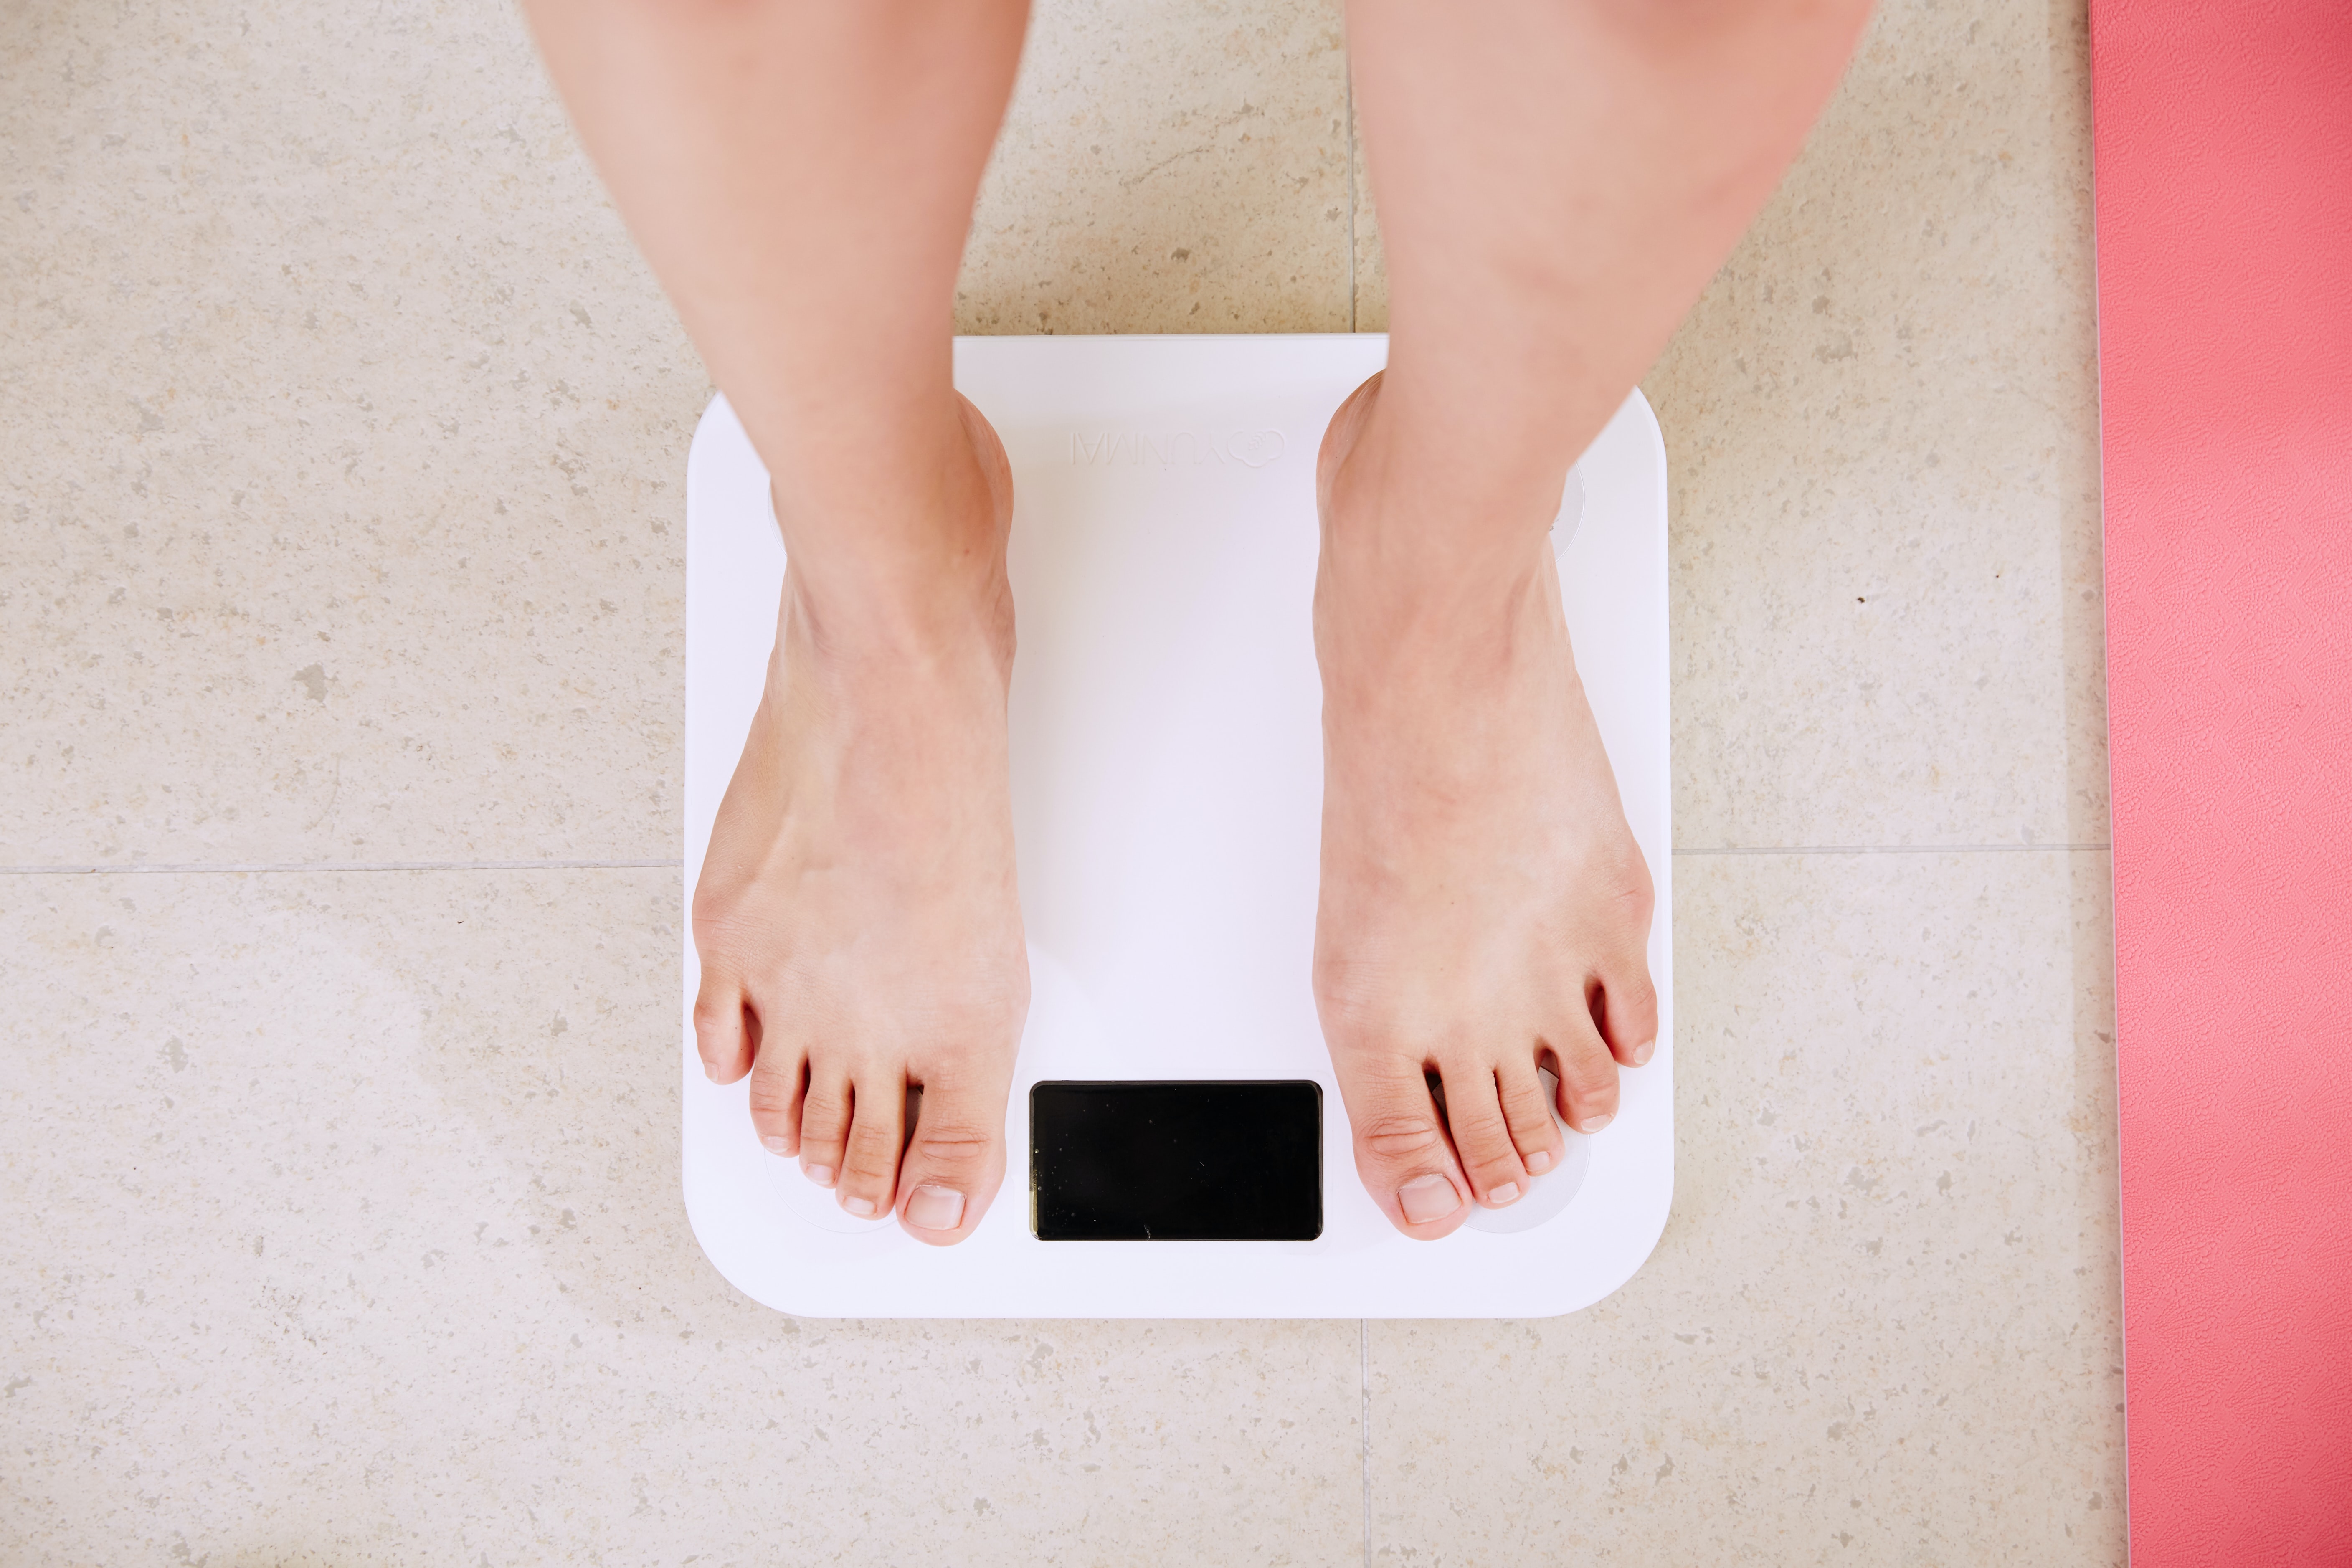 Are your hormones causing weight gain or something else?